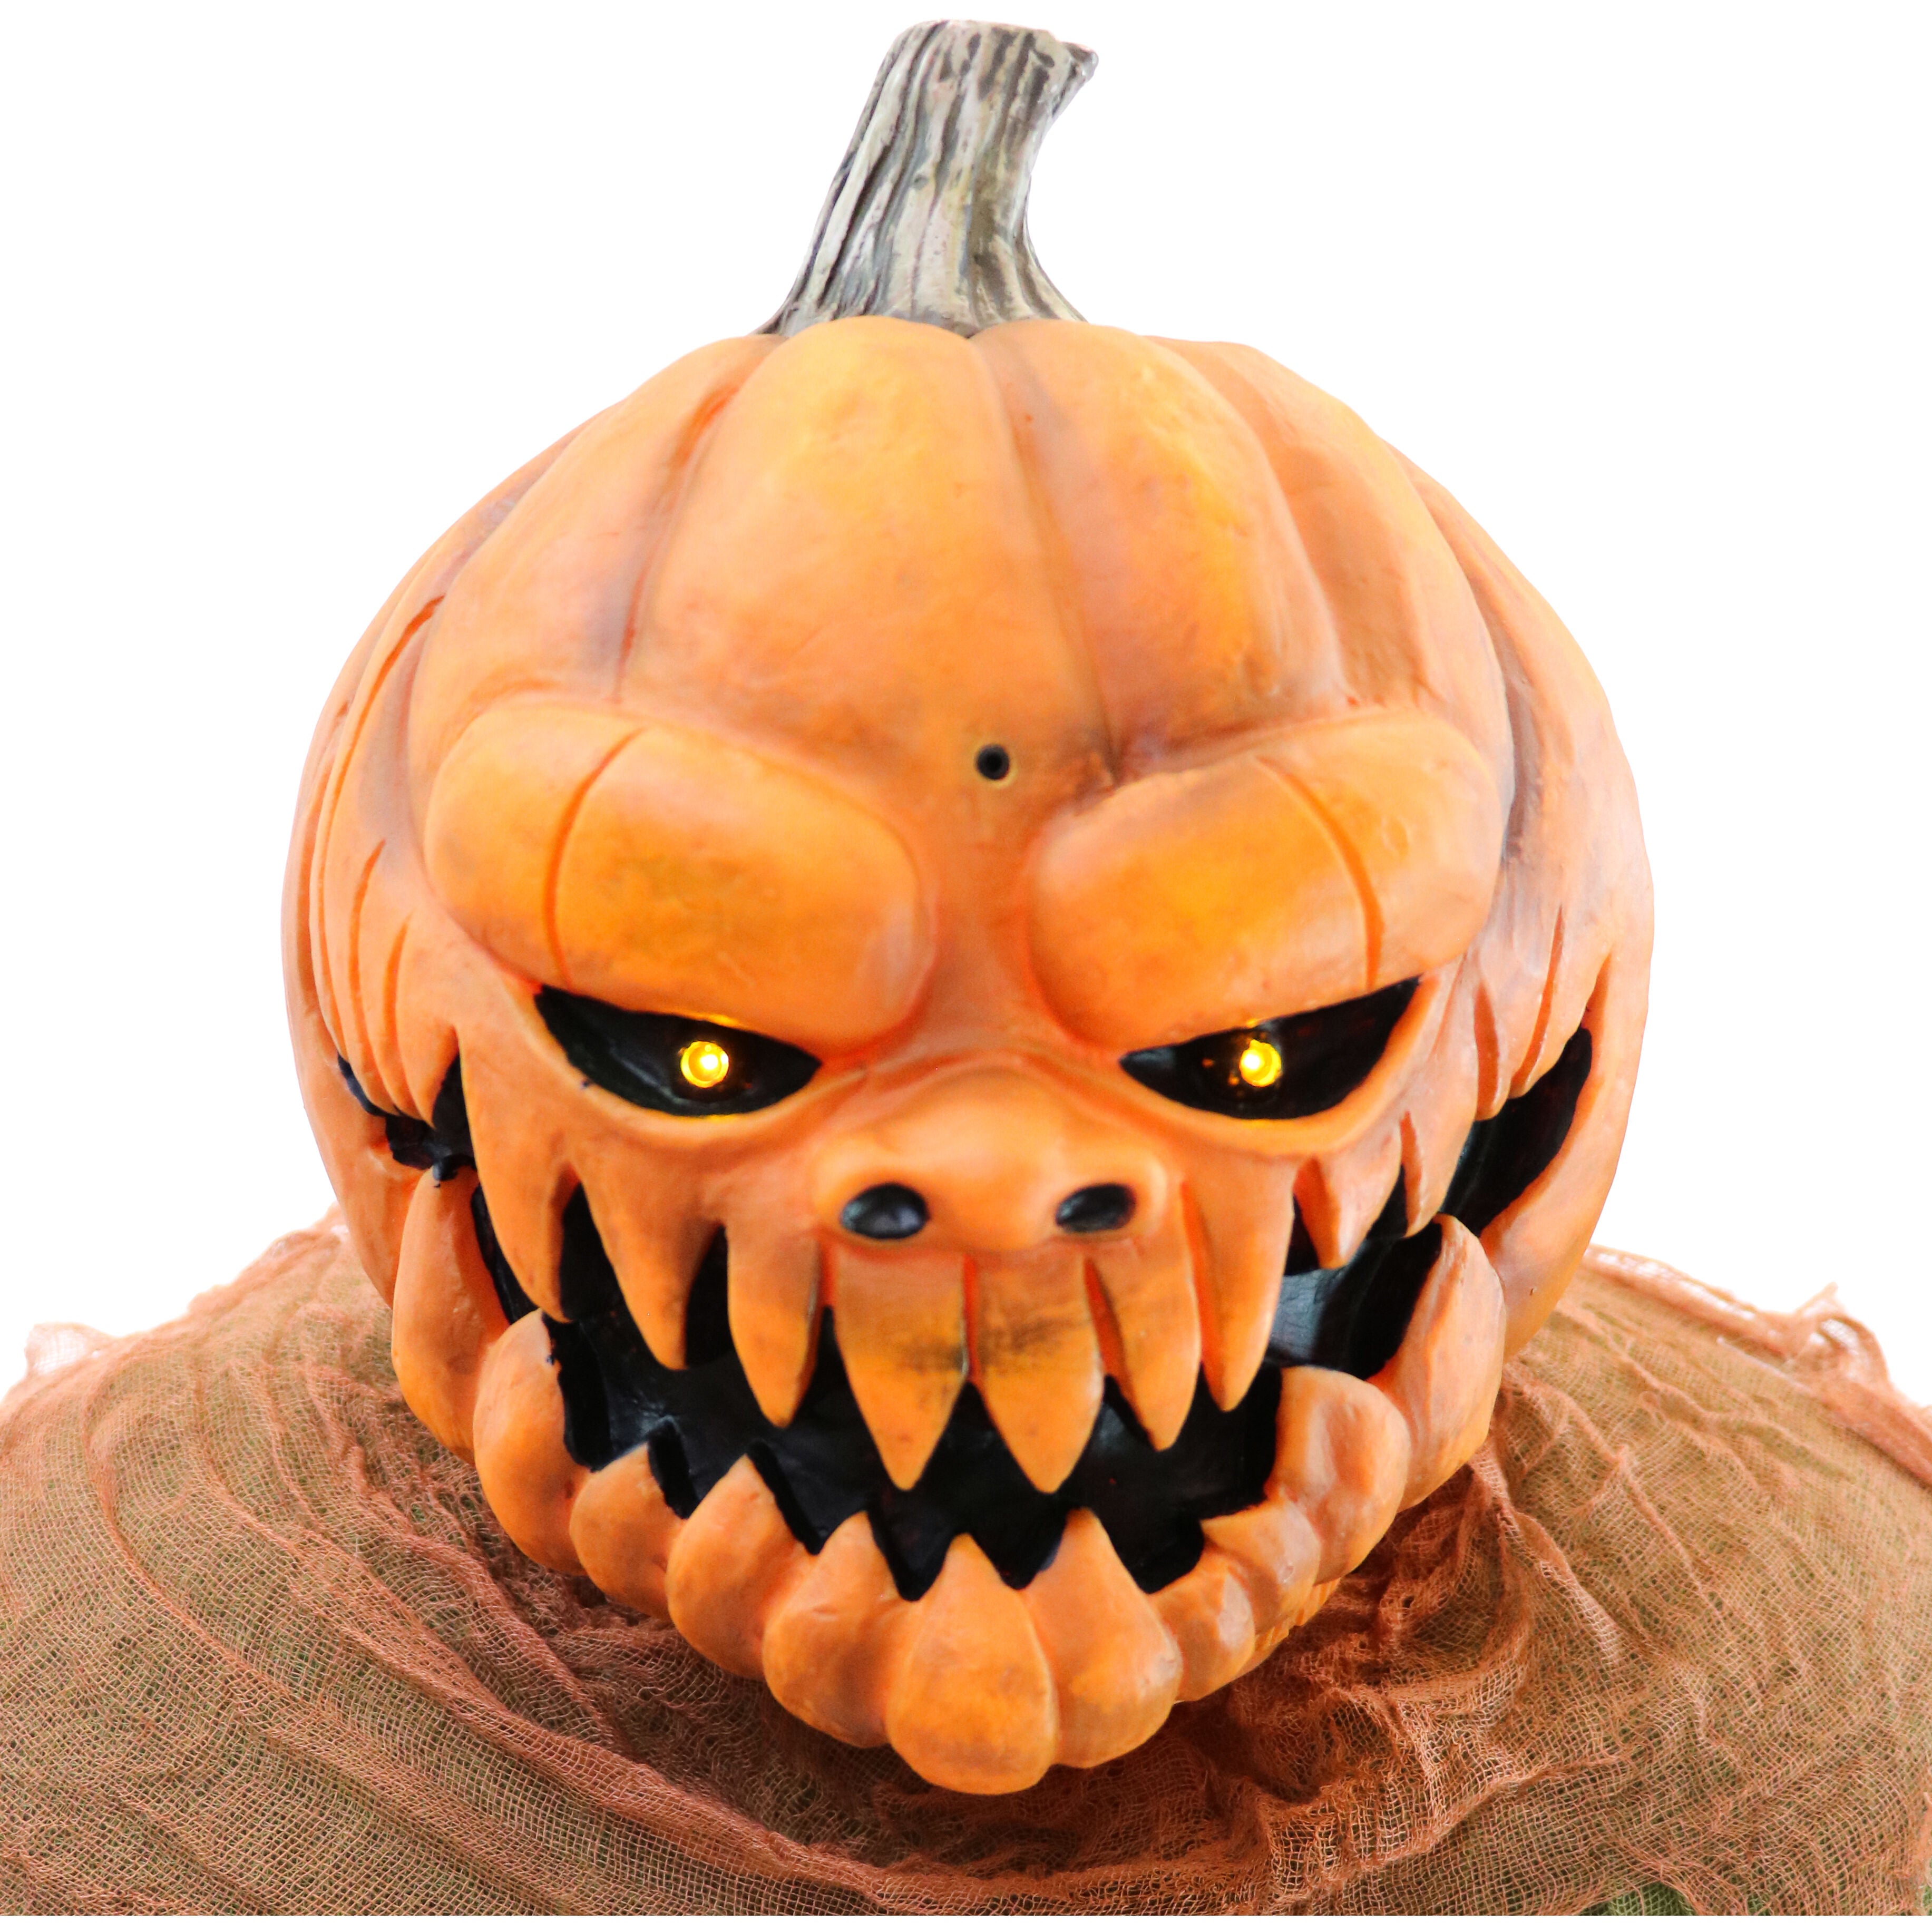 Haunted Hill Farm - Motion-Activated Jack O' Lunger by Tekky, Indoor or Covered Outdoor Premium Halloween Animatronic, Plug-In or Battery